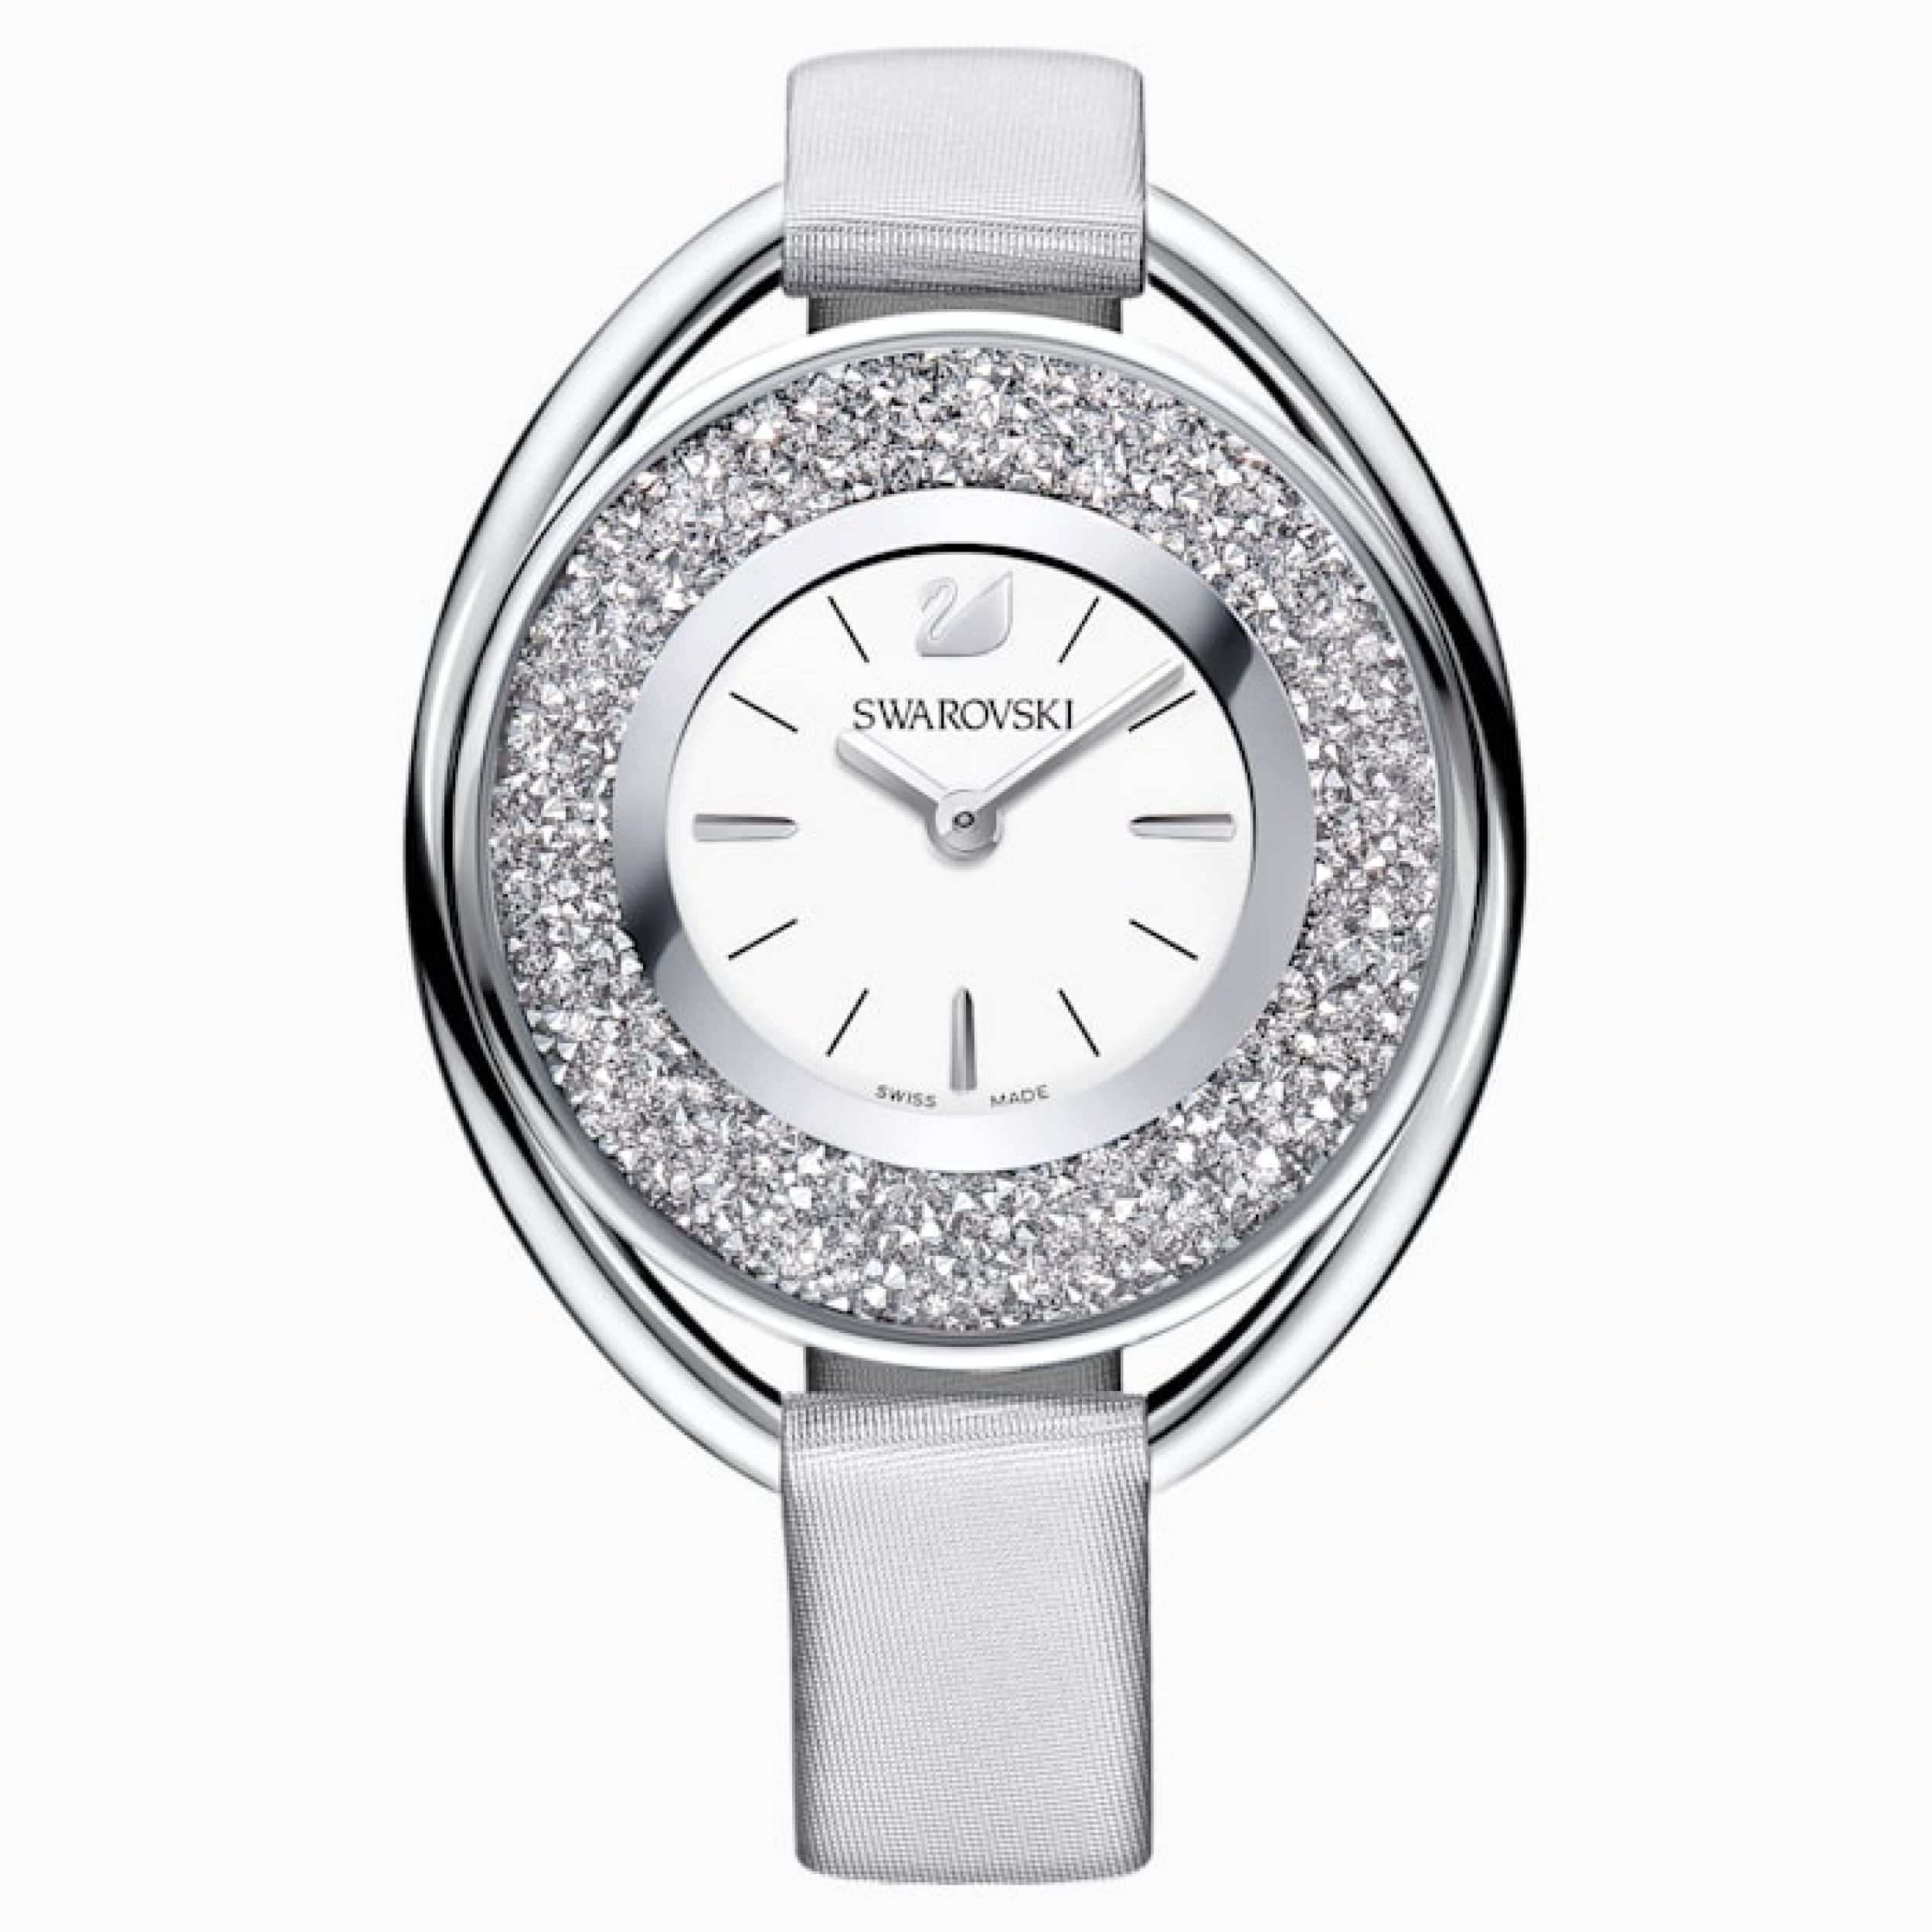 Crystal watches